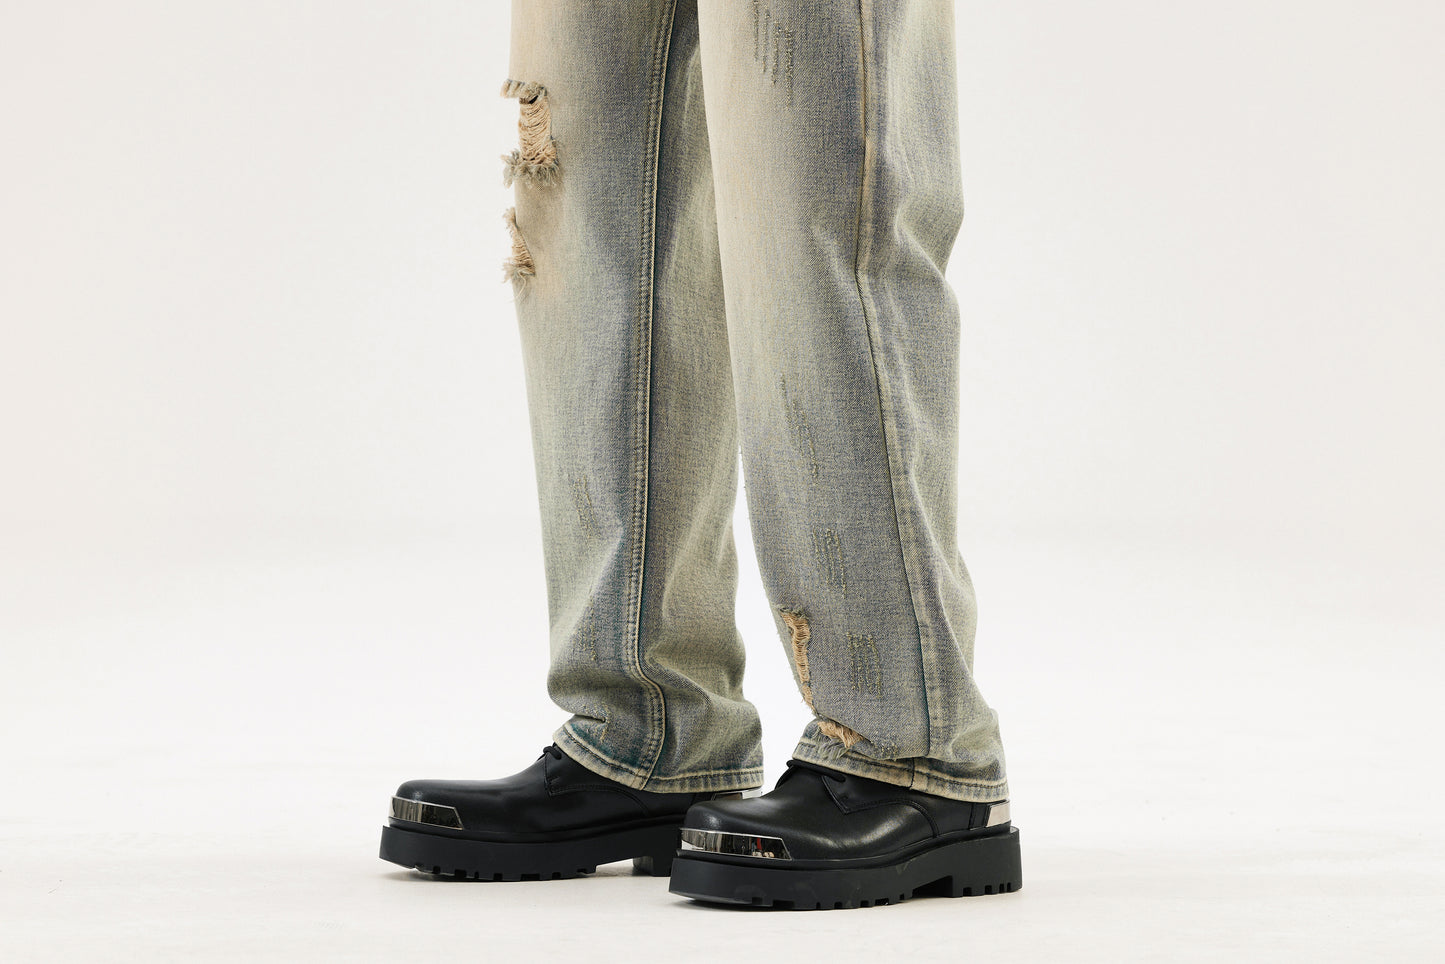 【23s September.】Trendy Washed Ripped Jeans